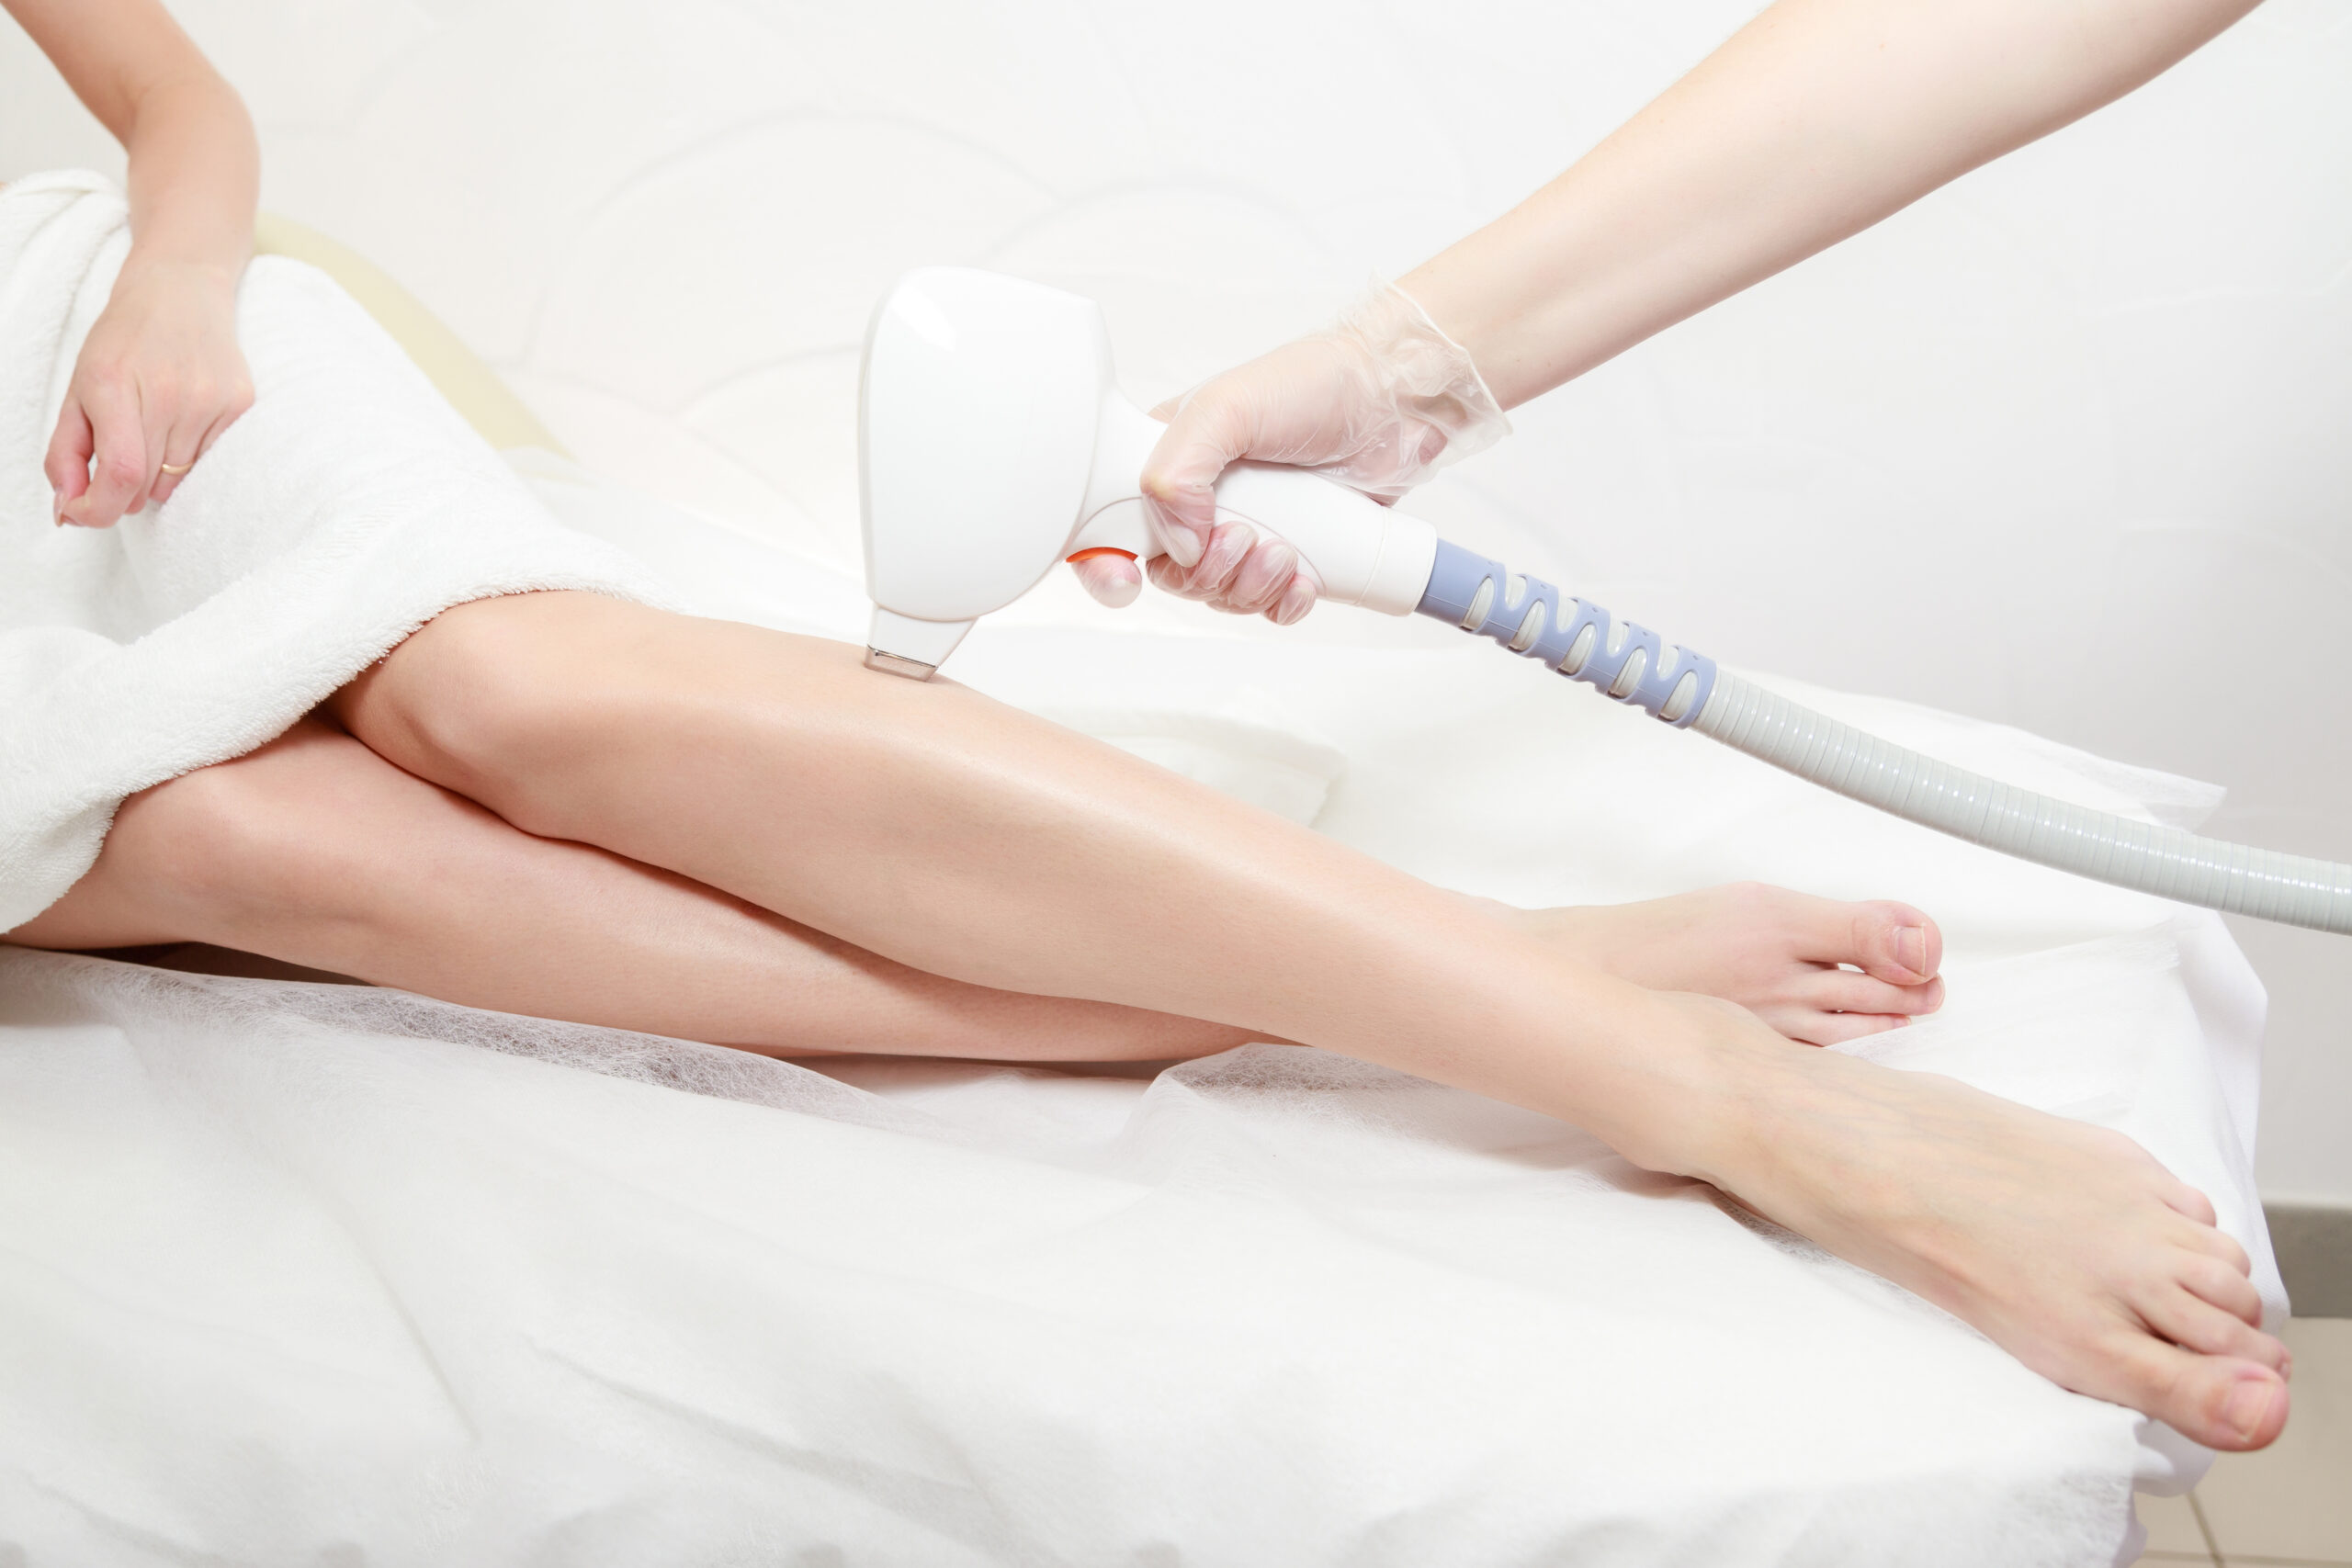 diode laser hair removal of beautiful female legs at the beautician. hair removal on the female body. laser hair removal in a clinic or beauty salon